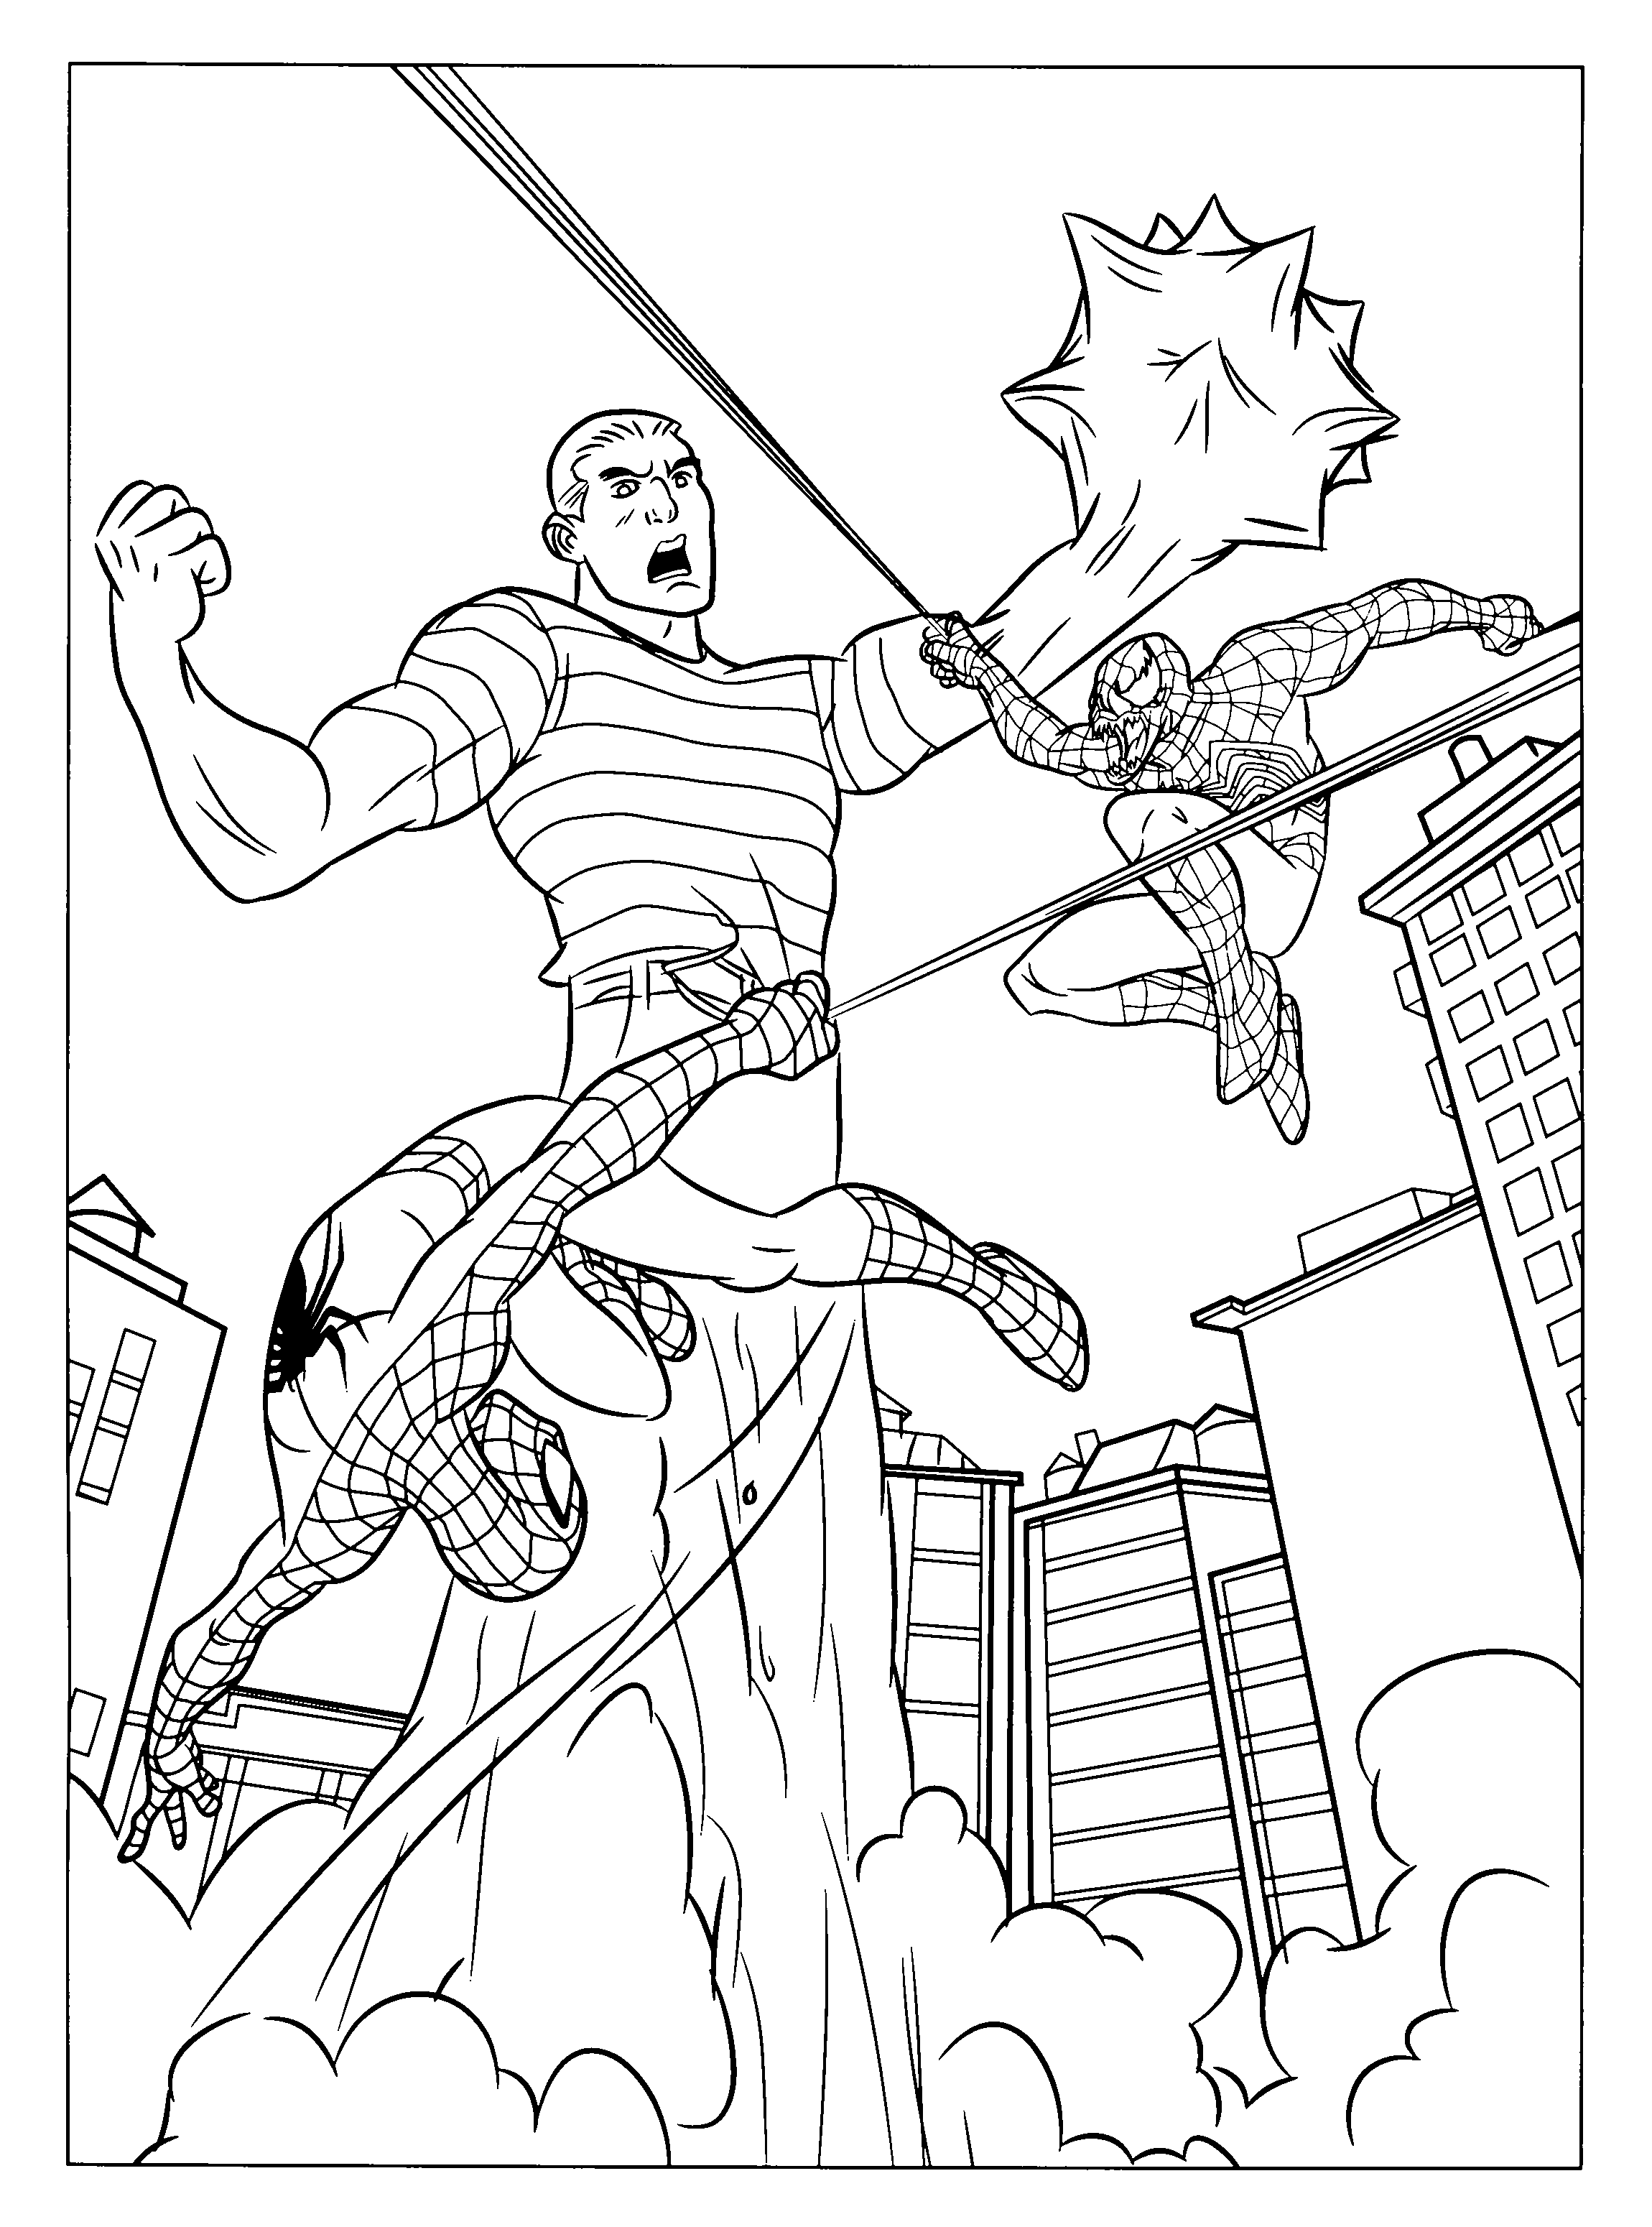 Spiderman 3 coloring pages